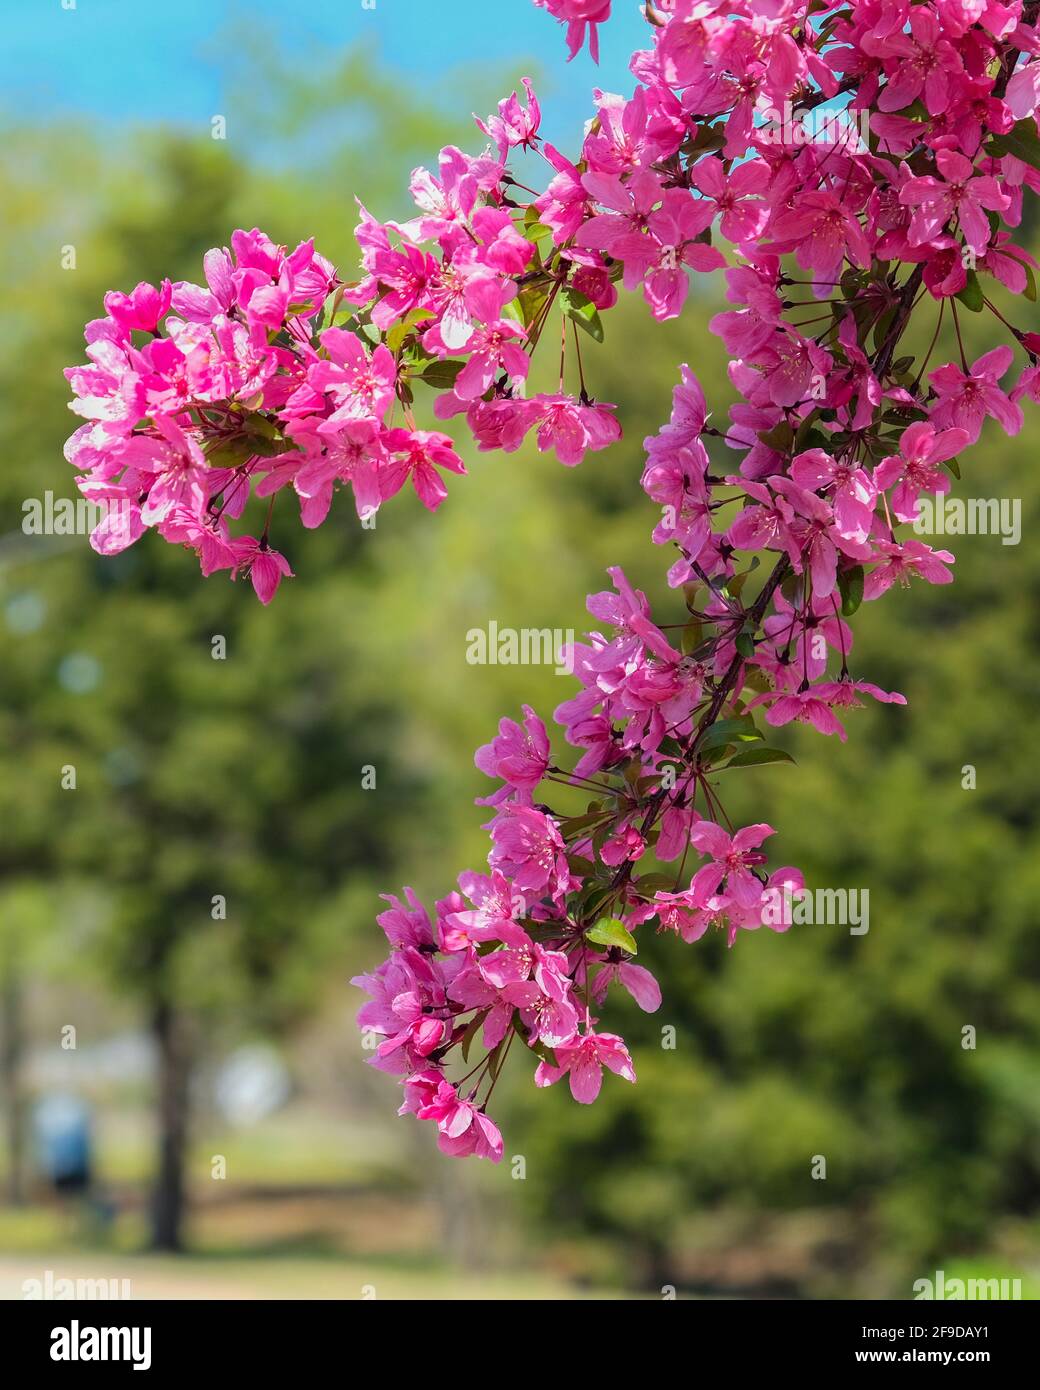 Prairie Rose crabapple; Malus loensis, closeup of a branch with rose colored blooms. Kansas, USA. Stock Photo